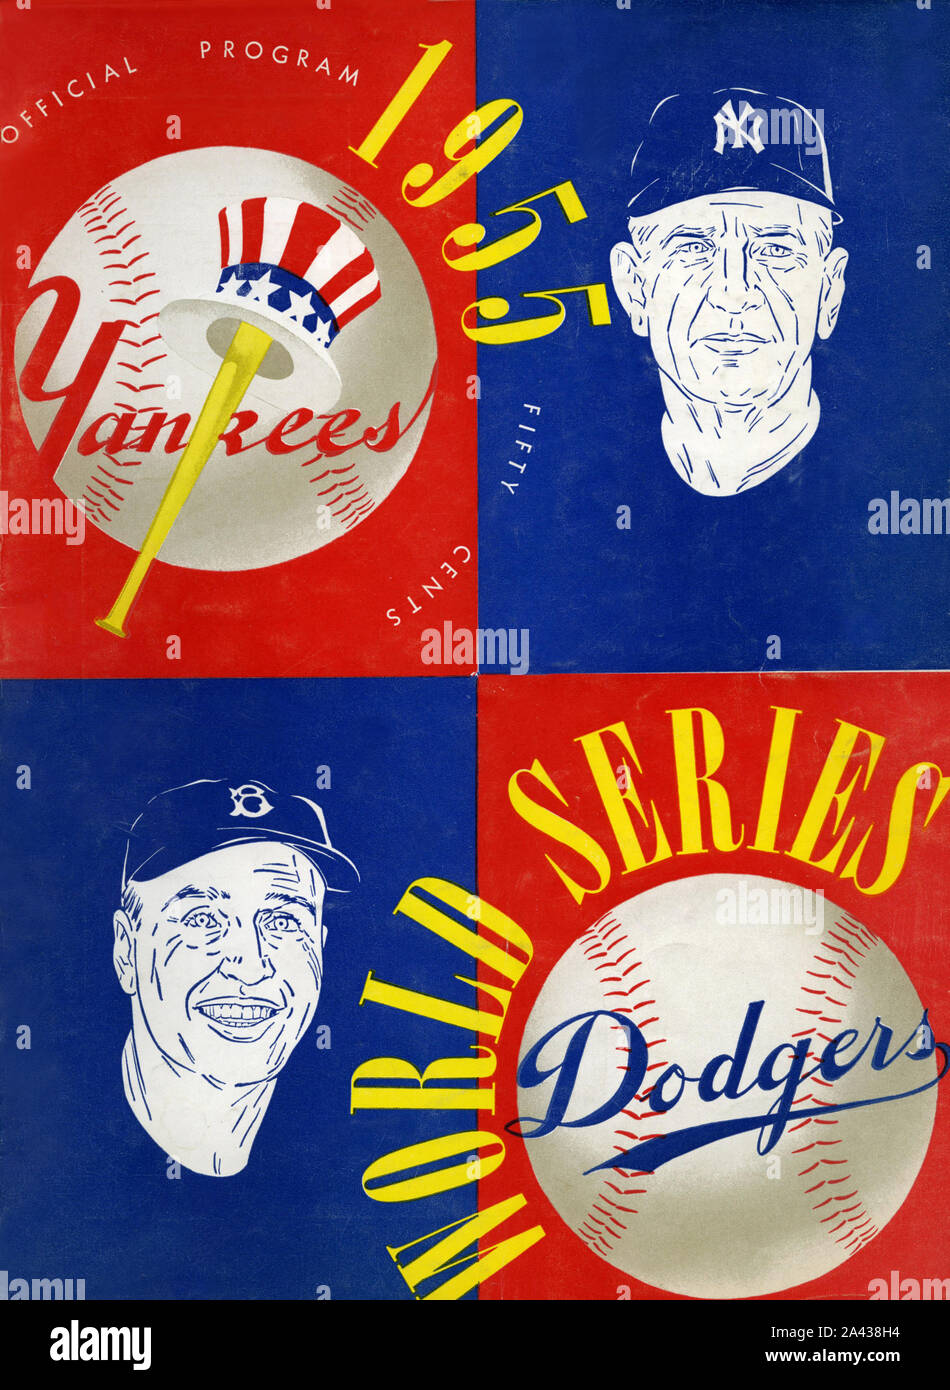 Vintage 1955 World Series program cover from New York Yankees versus the Brooklyn Dodgers in New York. The Dodgers finally defeated the Yankees for their only championship in Brooklyn before moving to Los Angeles in 1958. Stock Photo